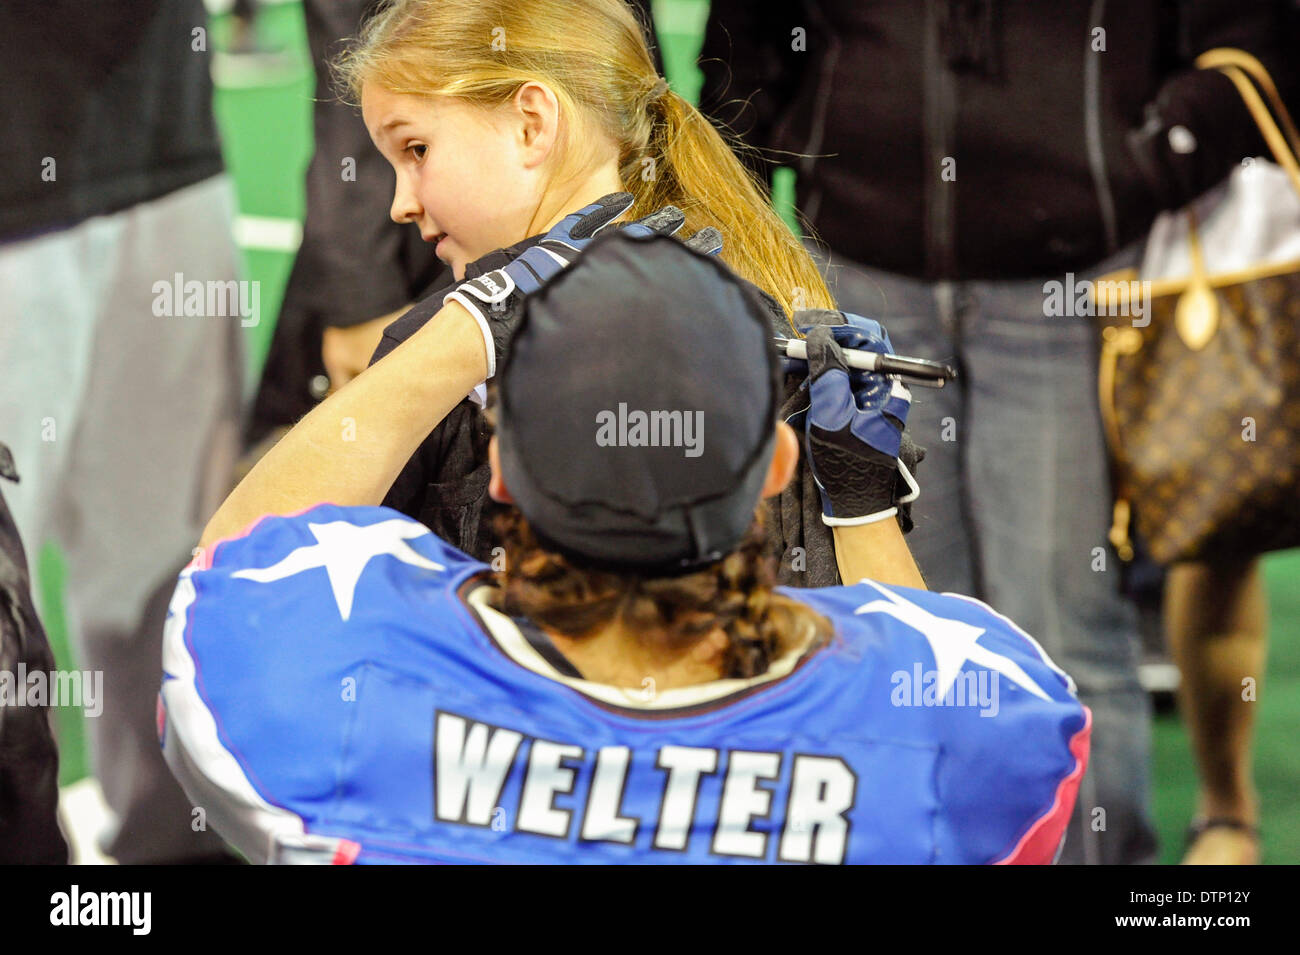 Allen, TX, USA. 21st Feb, 2014. Texas Revolution running back Jennifer Welter signs an autograph for 8-year-old Amrie Clower after the Revolution defeated the Cedar Rapids Titans in an Indoor Football League game at the Allen Event Center Friday, February 21, 2014, in Allen, Texas. The 5-foot-2-inch, 130 pound Welter is the first woman to play professional football at a position other than kicker, she made the final roster of the Texas Revolution of the Indoor Football League, as a running back. © csm/Alamy Live News Stock Photo